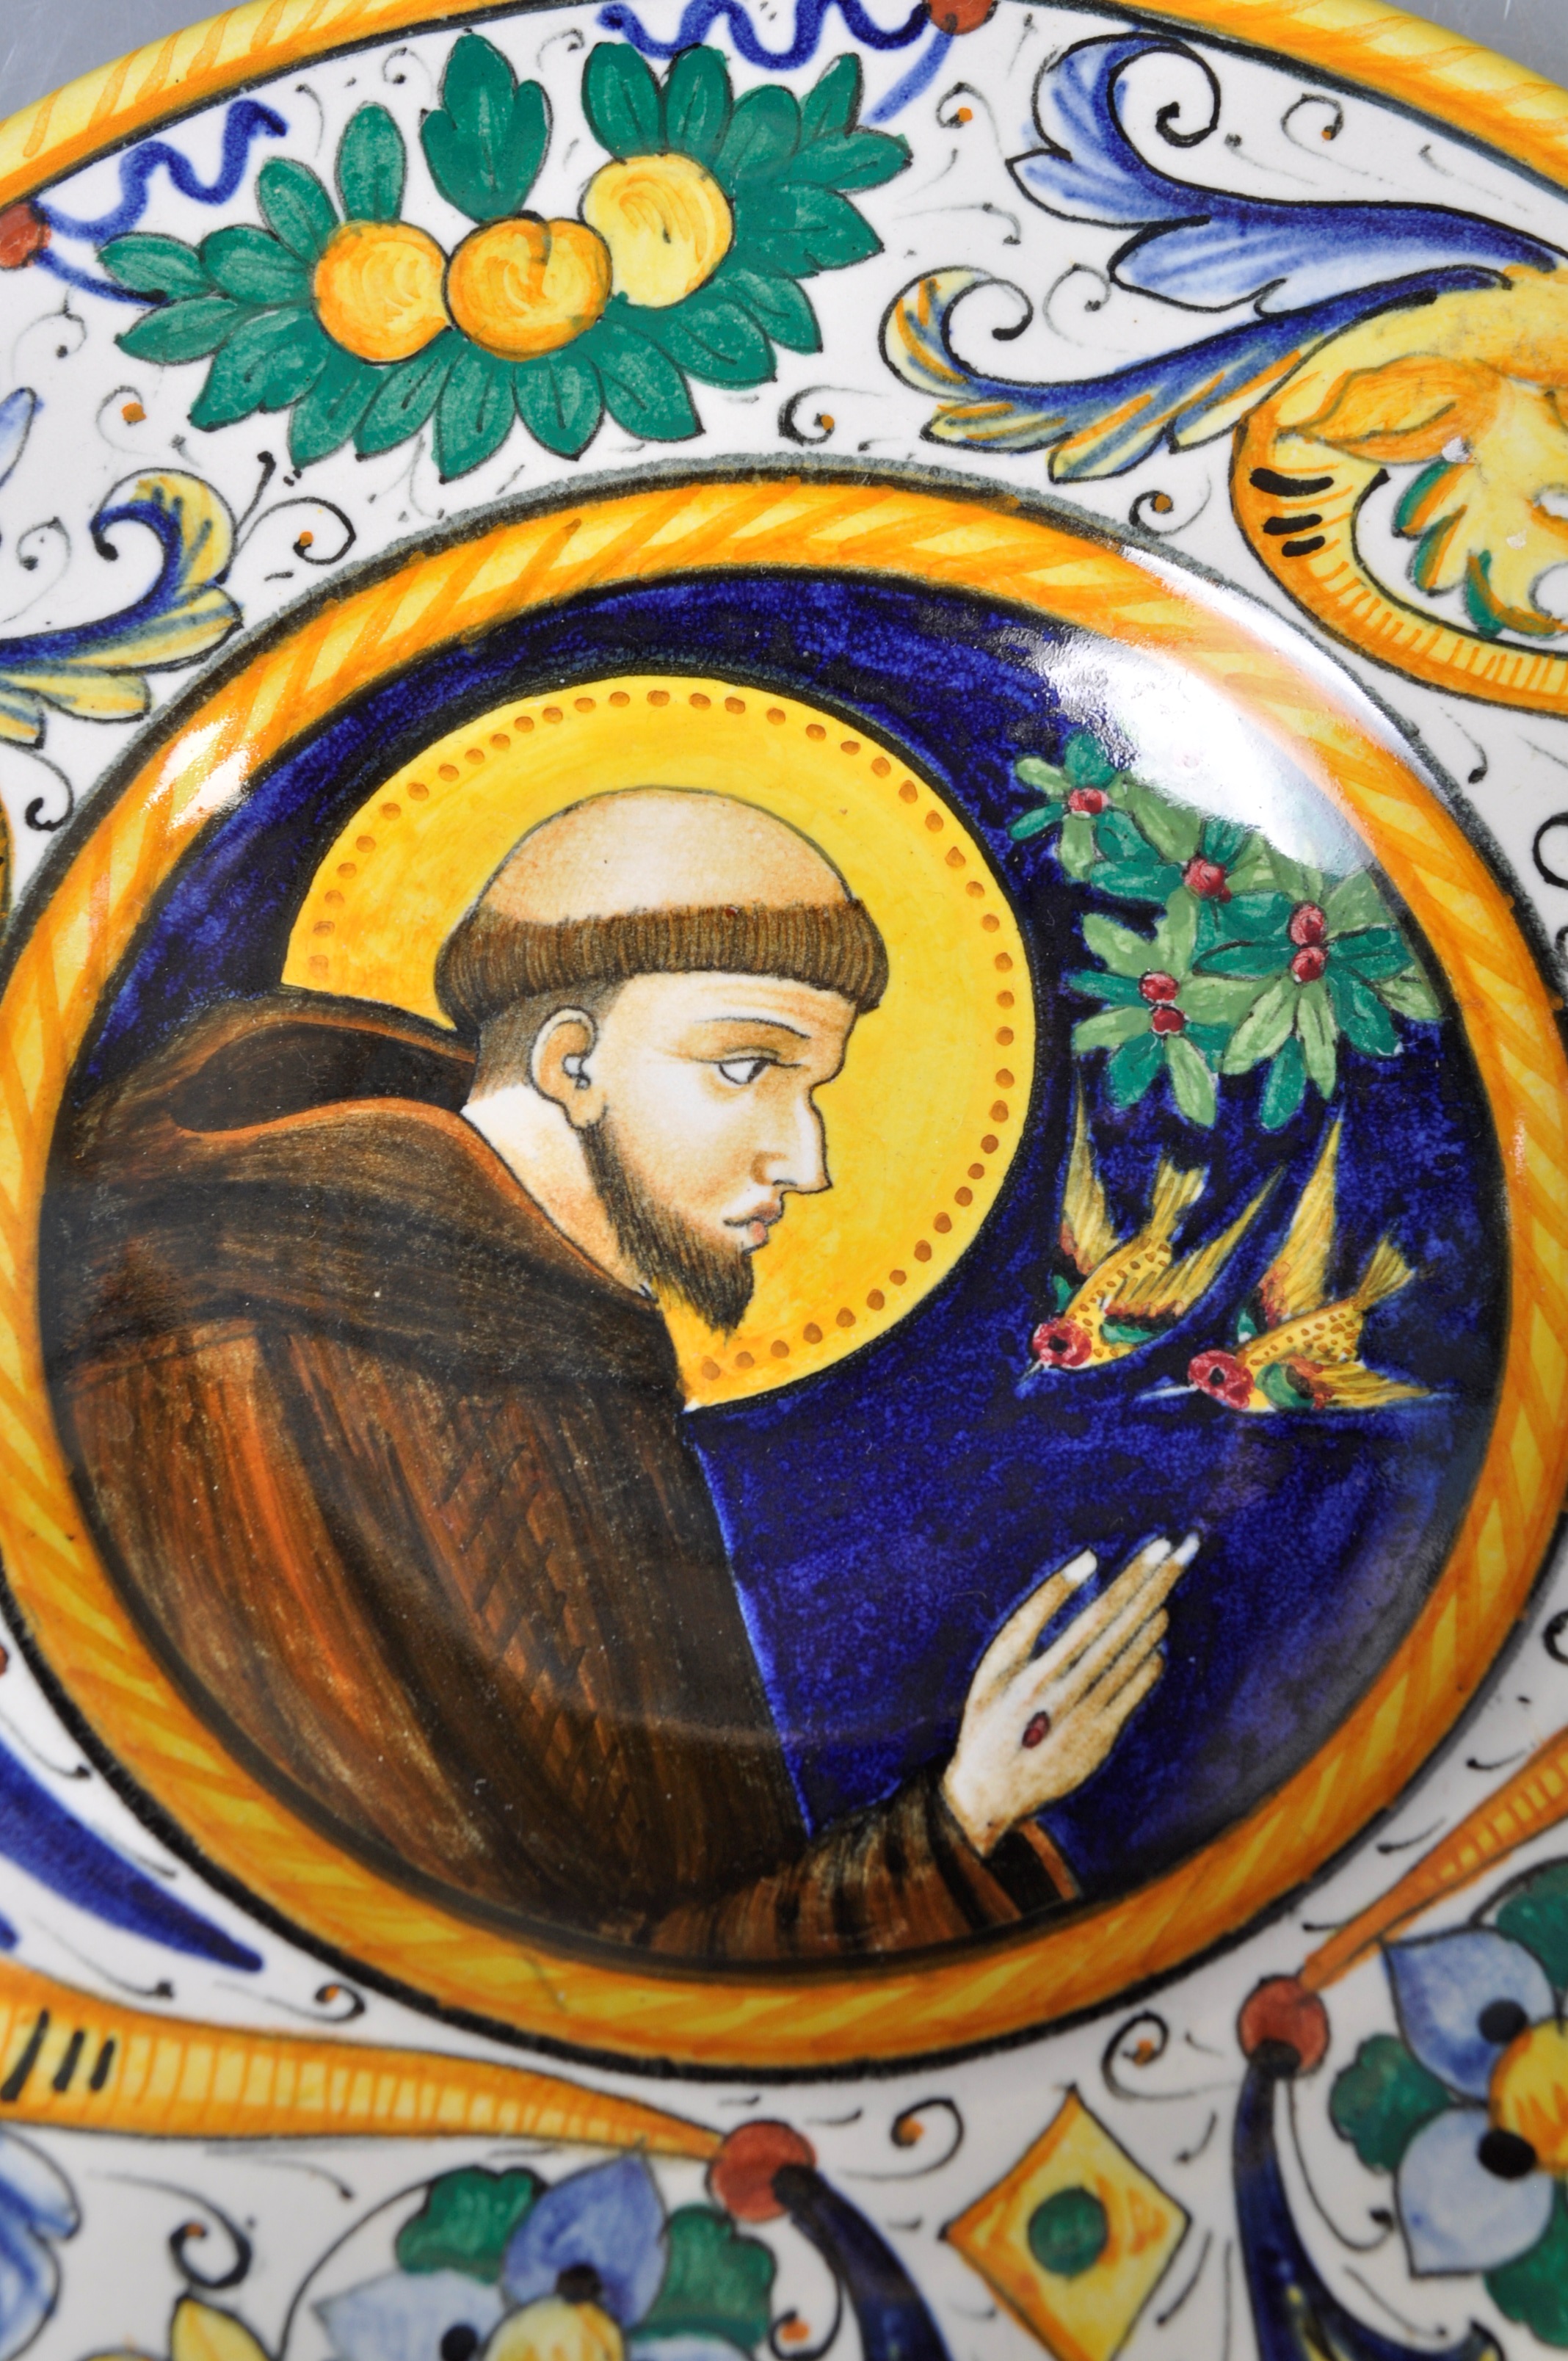 MID CENTURY ITALIAN MAJOLICA PAINTED PLATE DEPICTING A MONK - Image 3 of 7